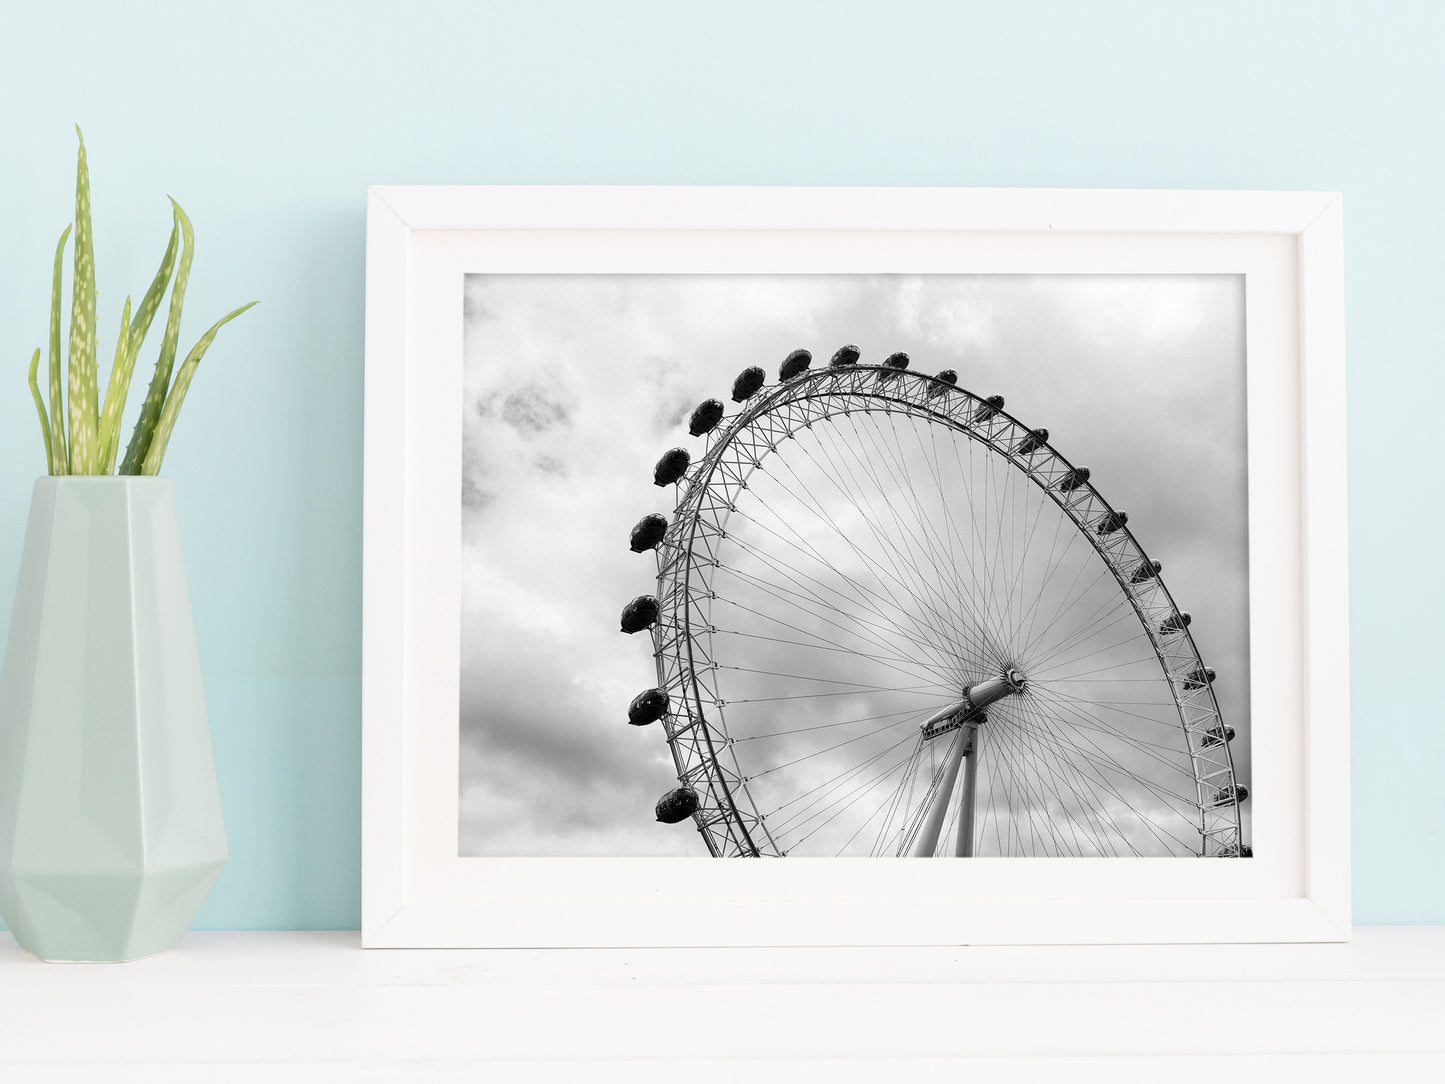 London Eye With Clouds Print